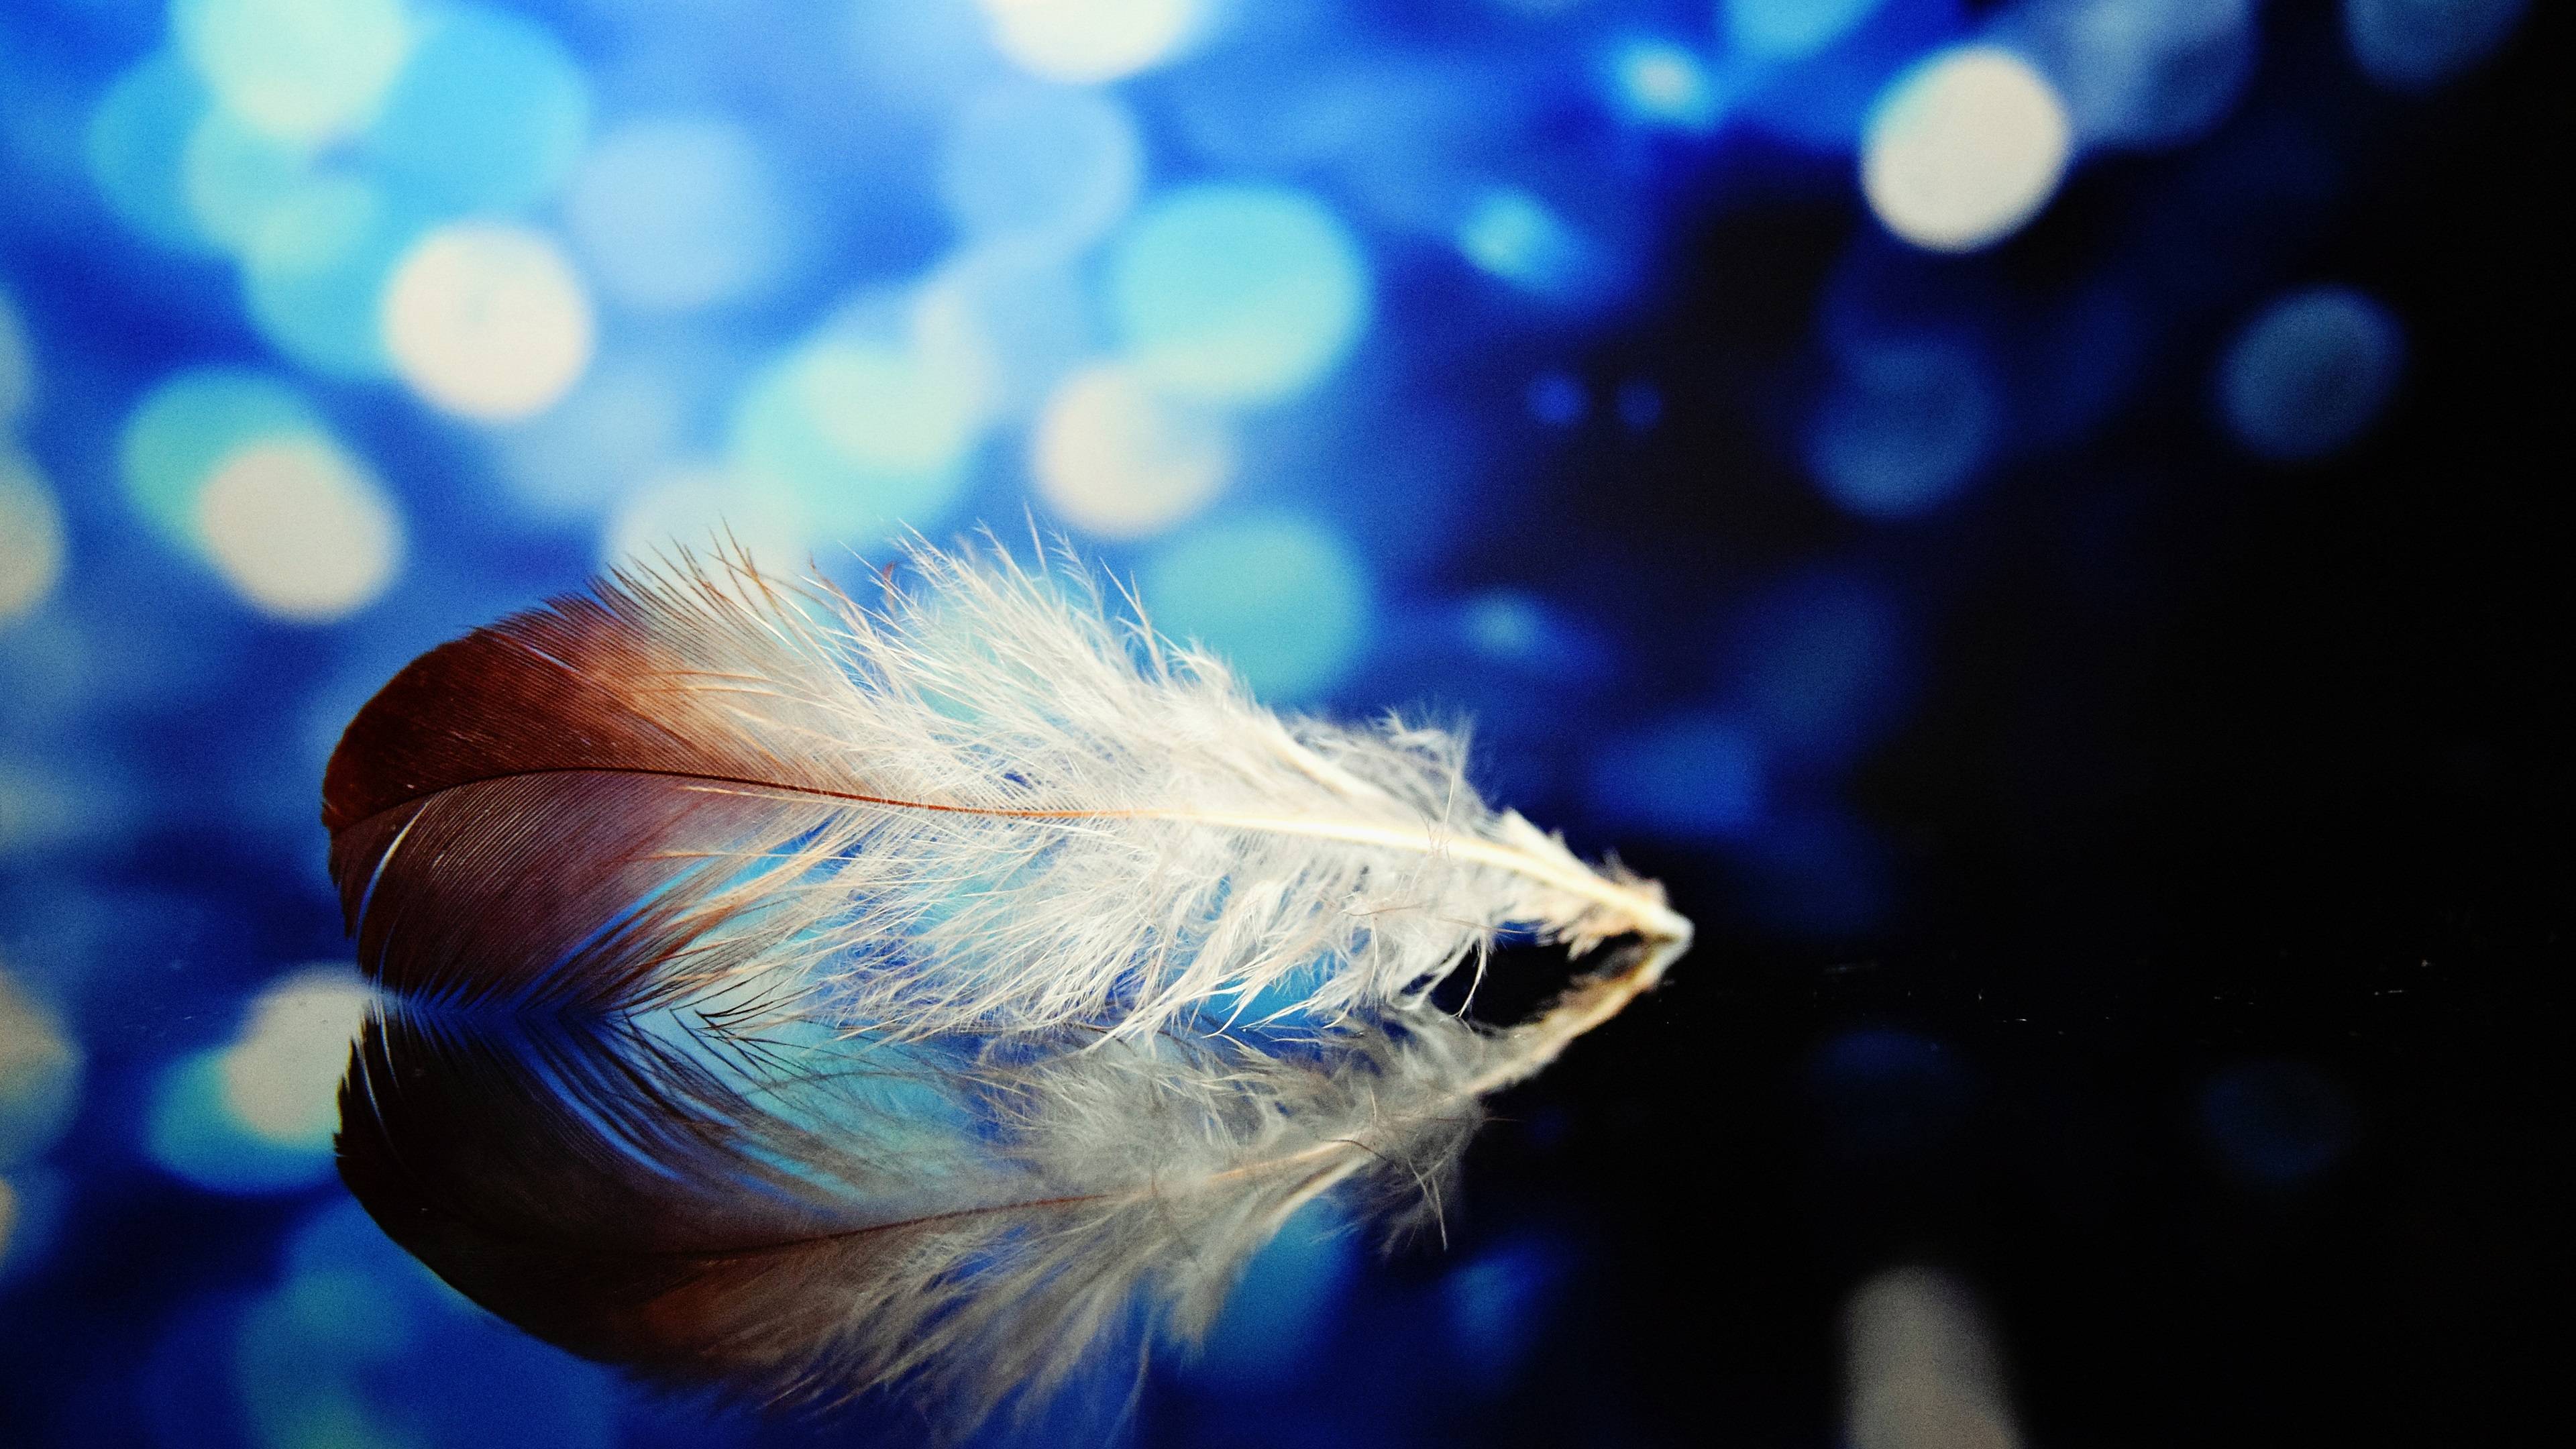 Feather 4K wallpaper for your desktop or mobile screen free and easy to download